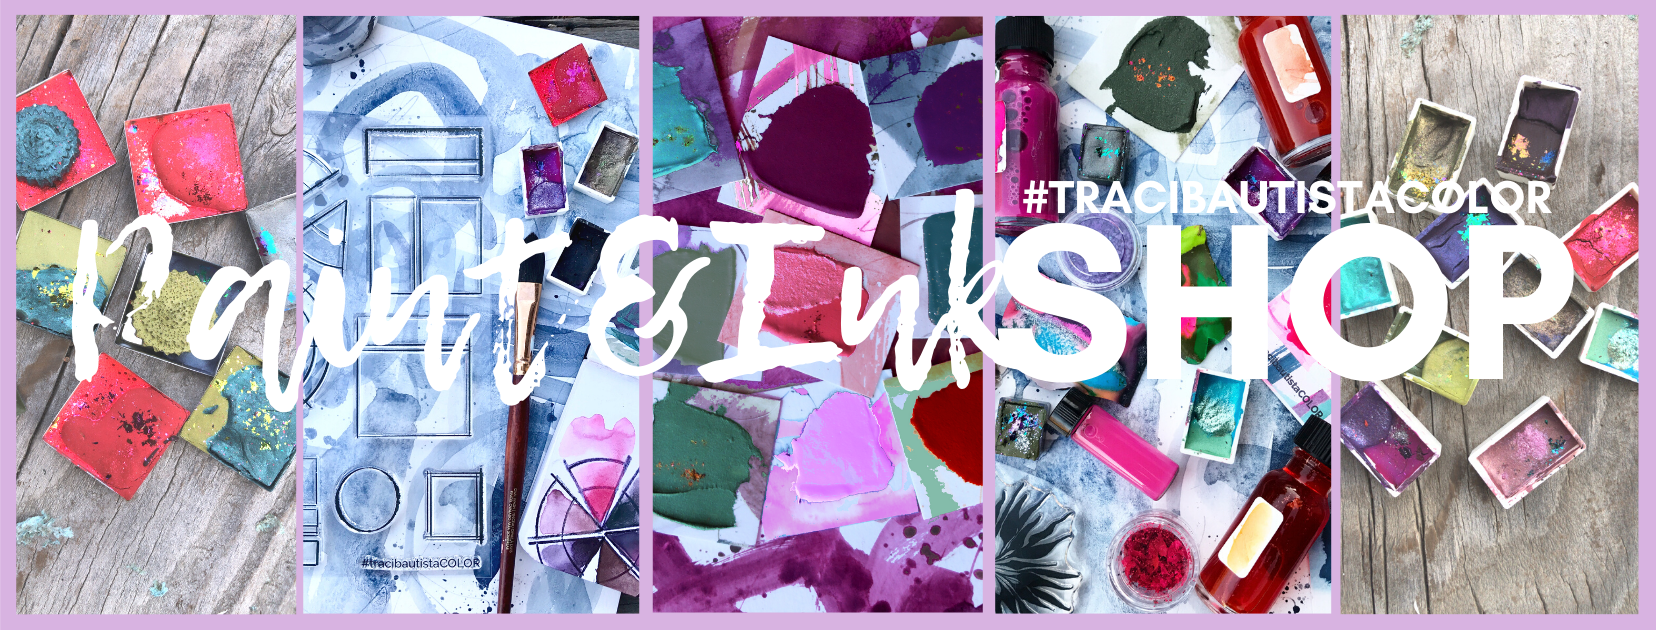 #tracibautistaCOLOR paints + inks